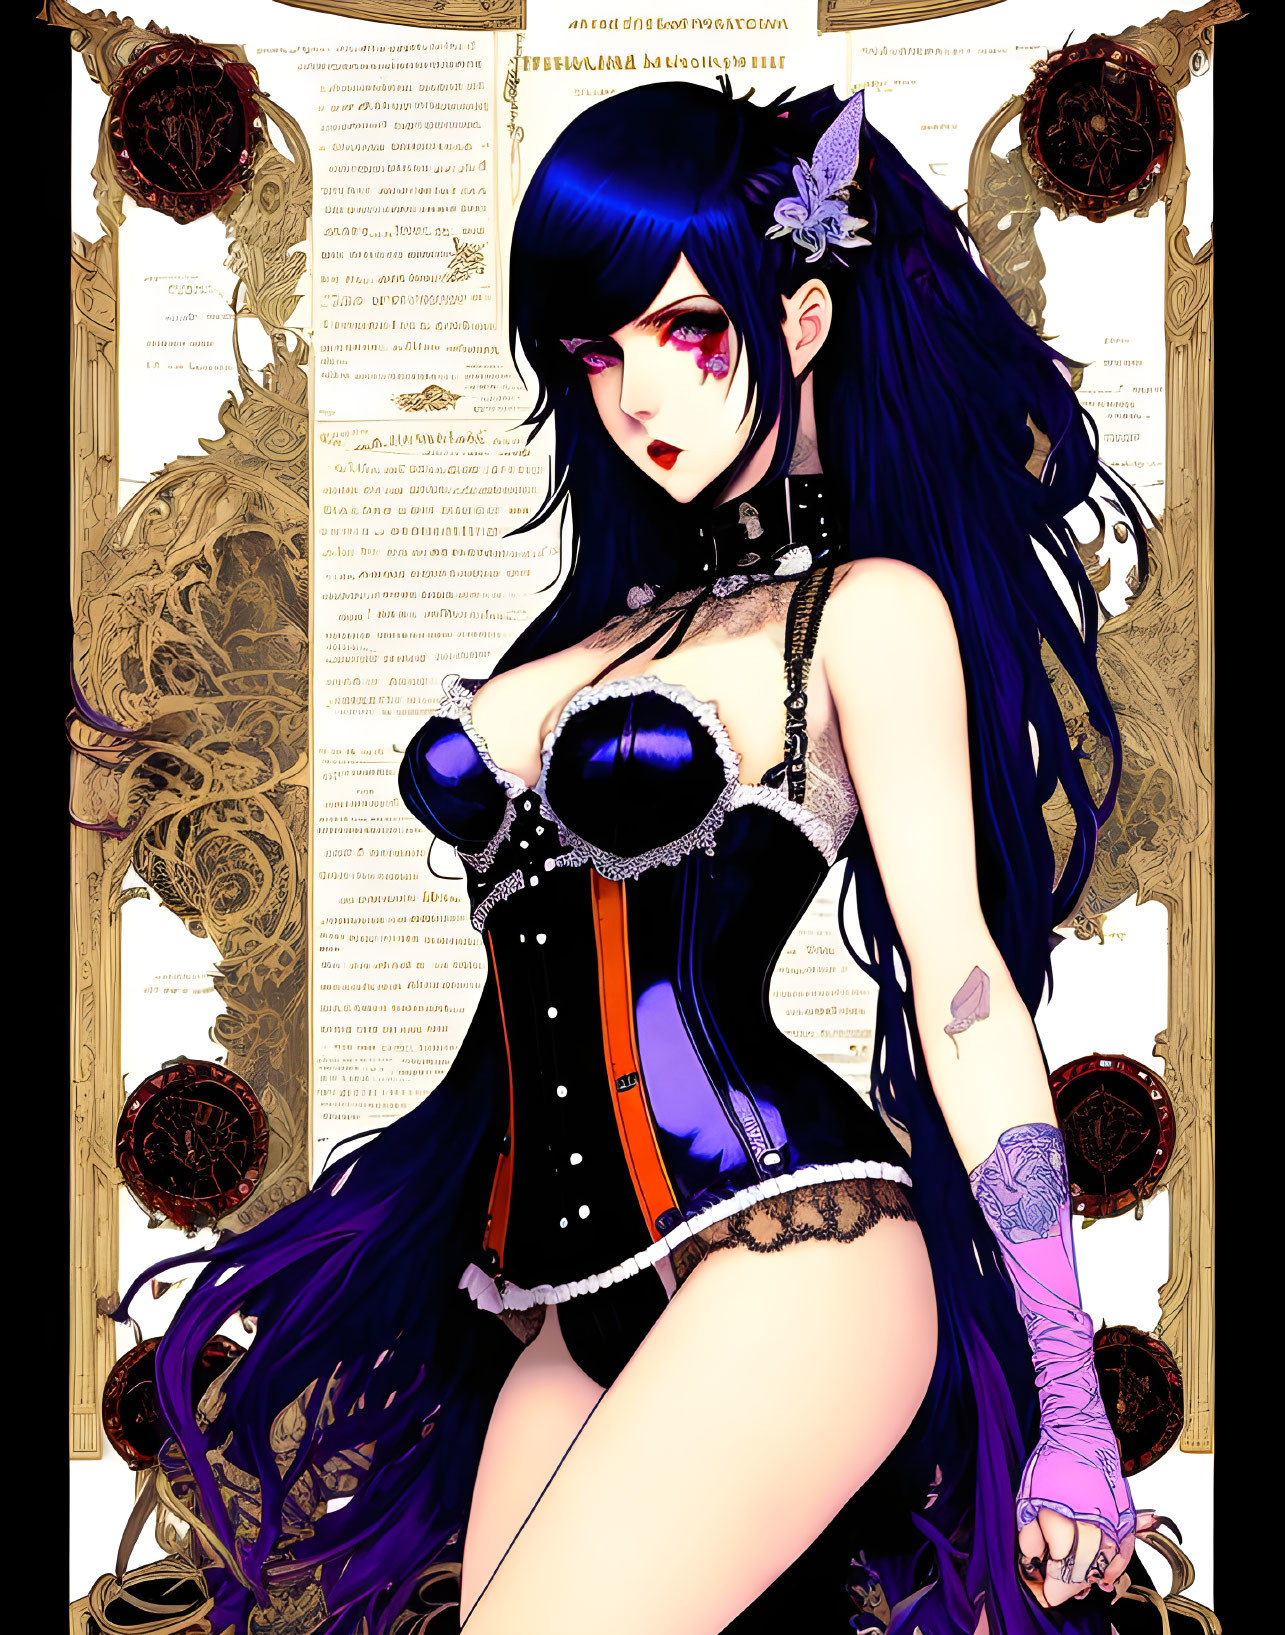 Female character with long purple hair, black corset, gothic jewelry, and tattoos.